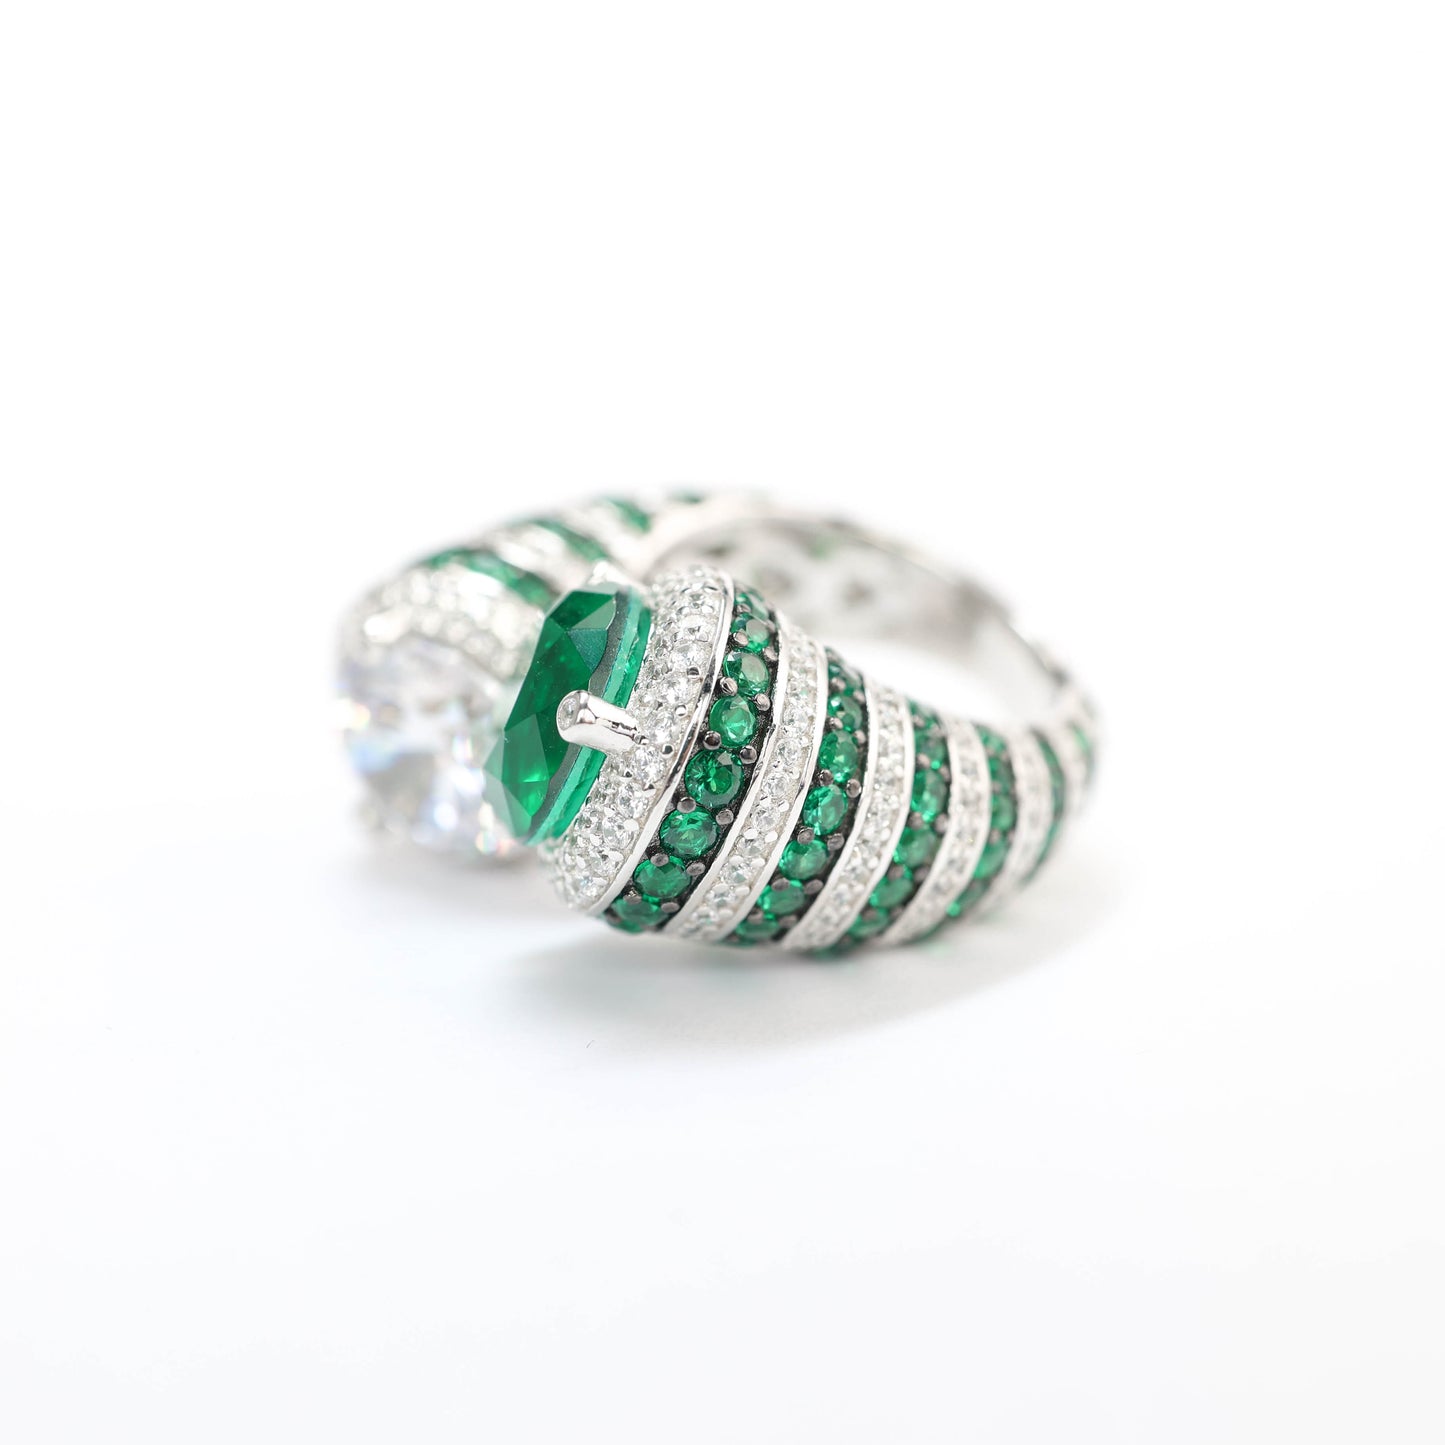 Micro-setting Emerald color Lab created stones Zebra ring, sterling silver